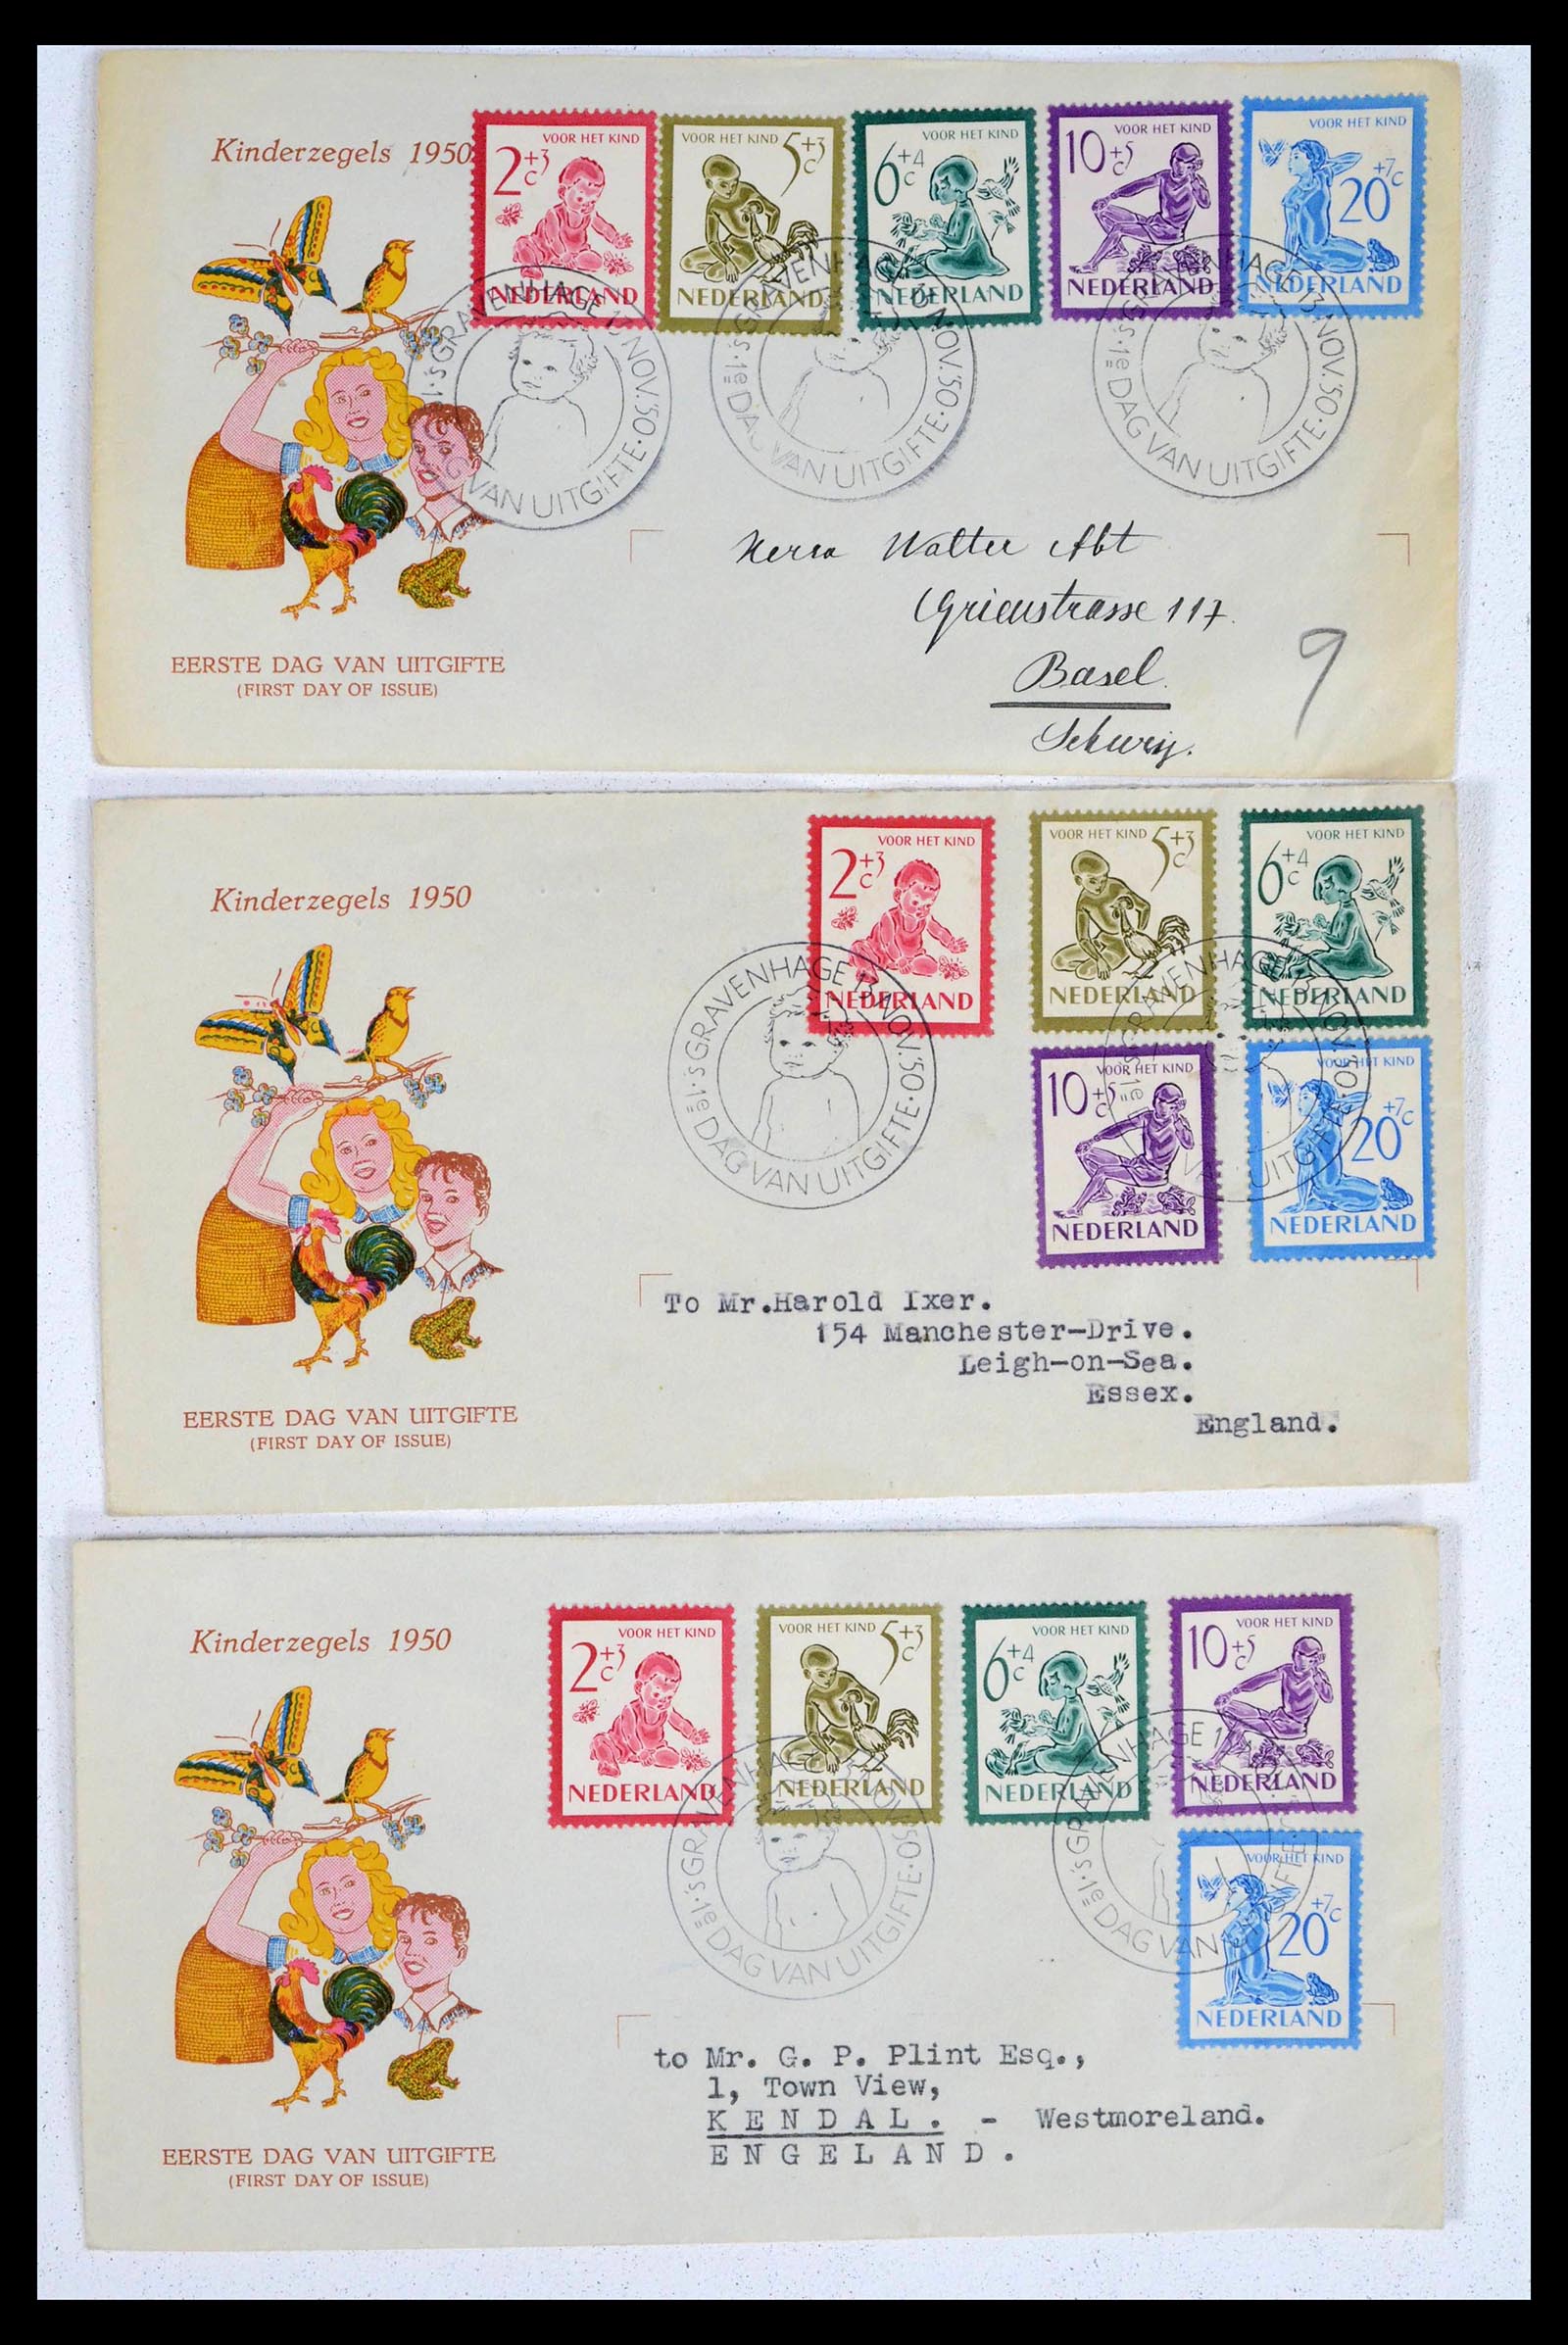 39474 0001 - Stamp collection 39474 Netherlands FDC's 1950-1960.